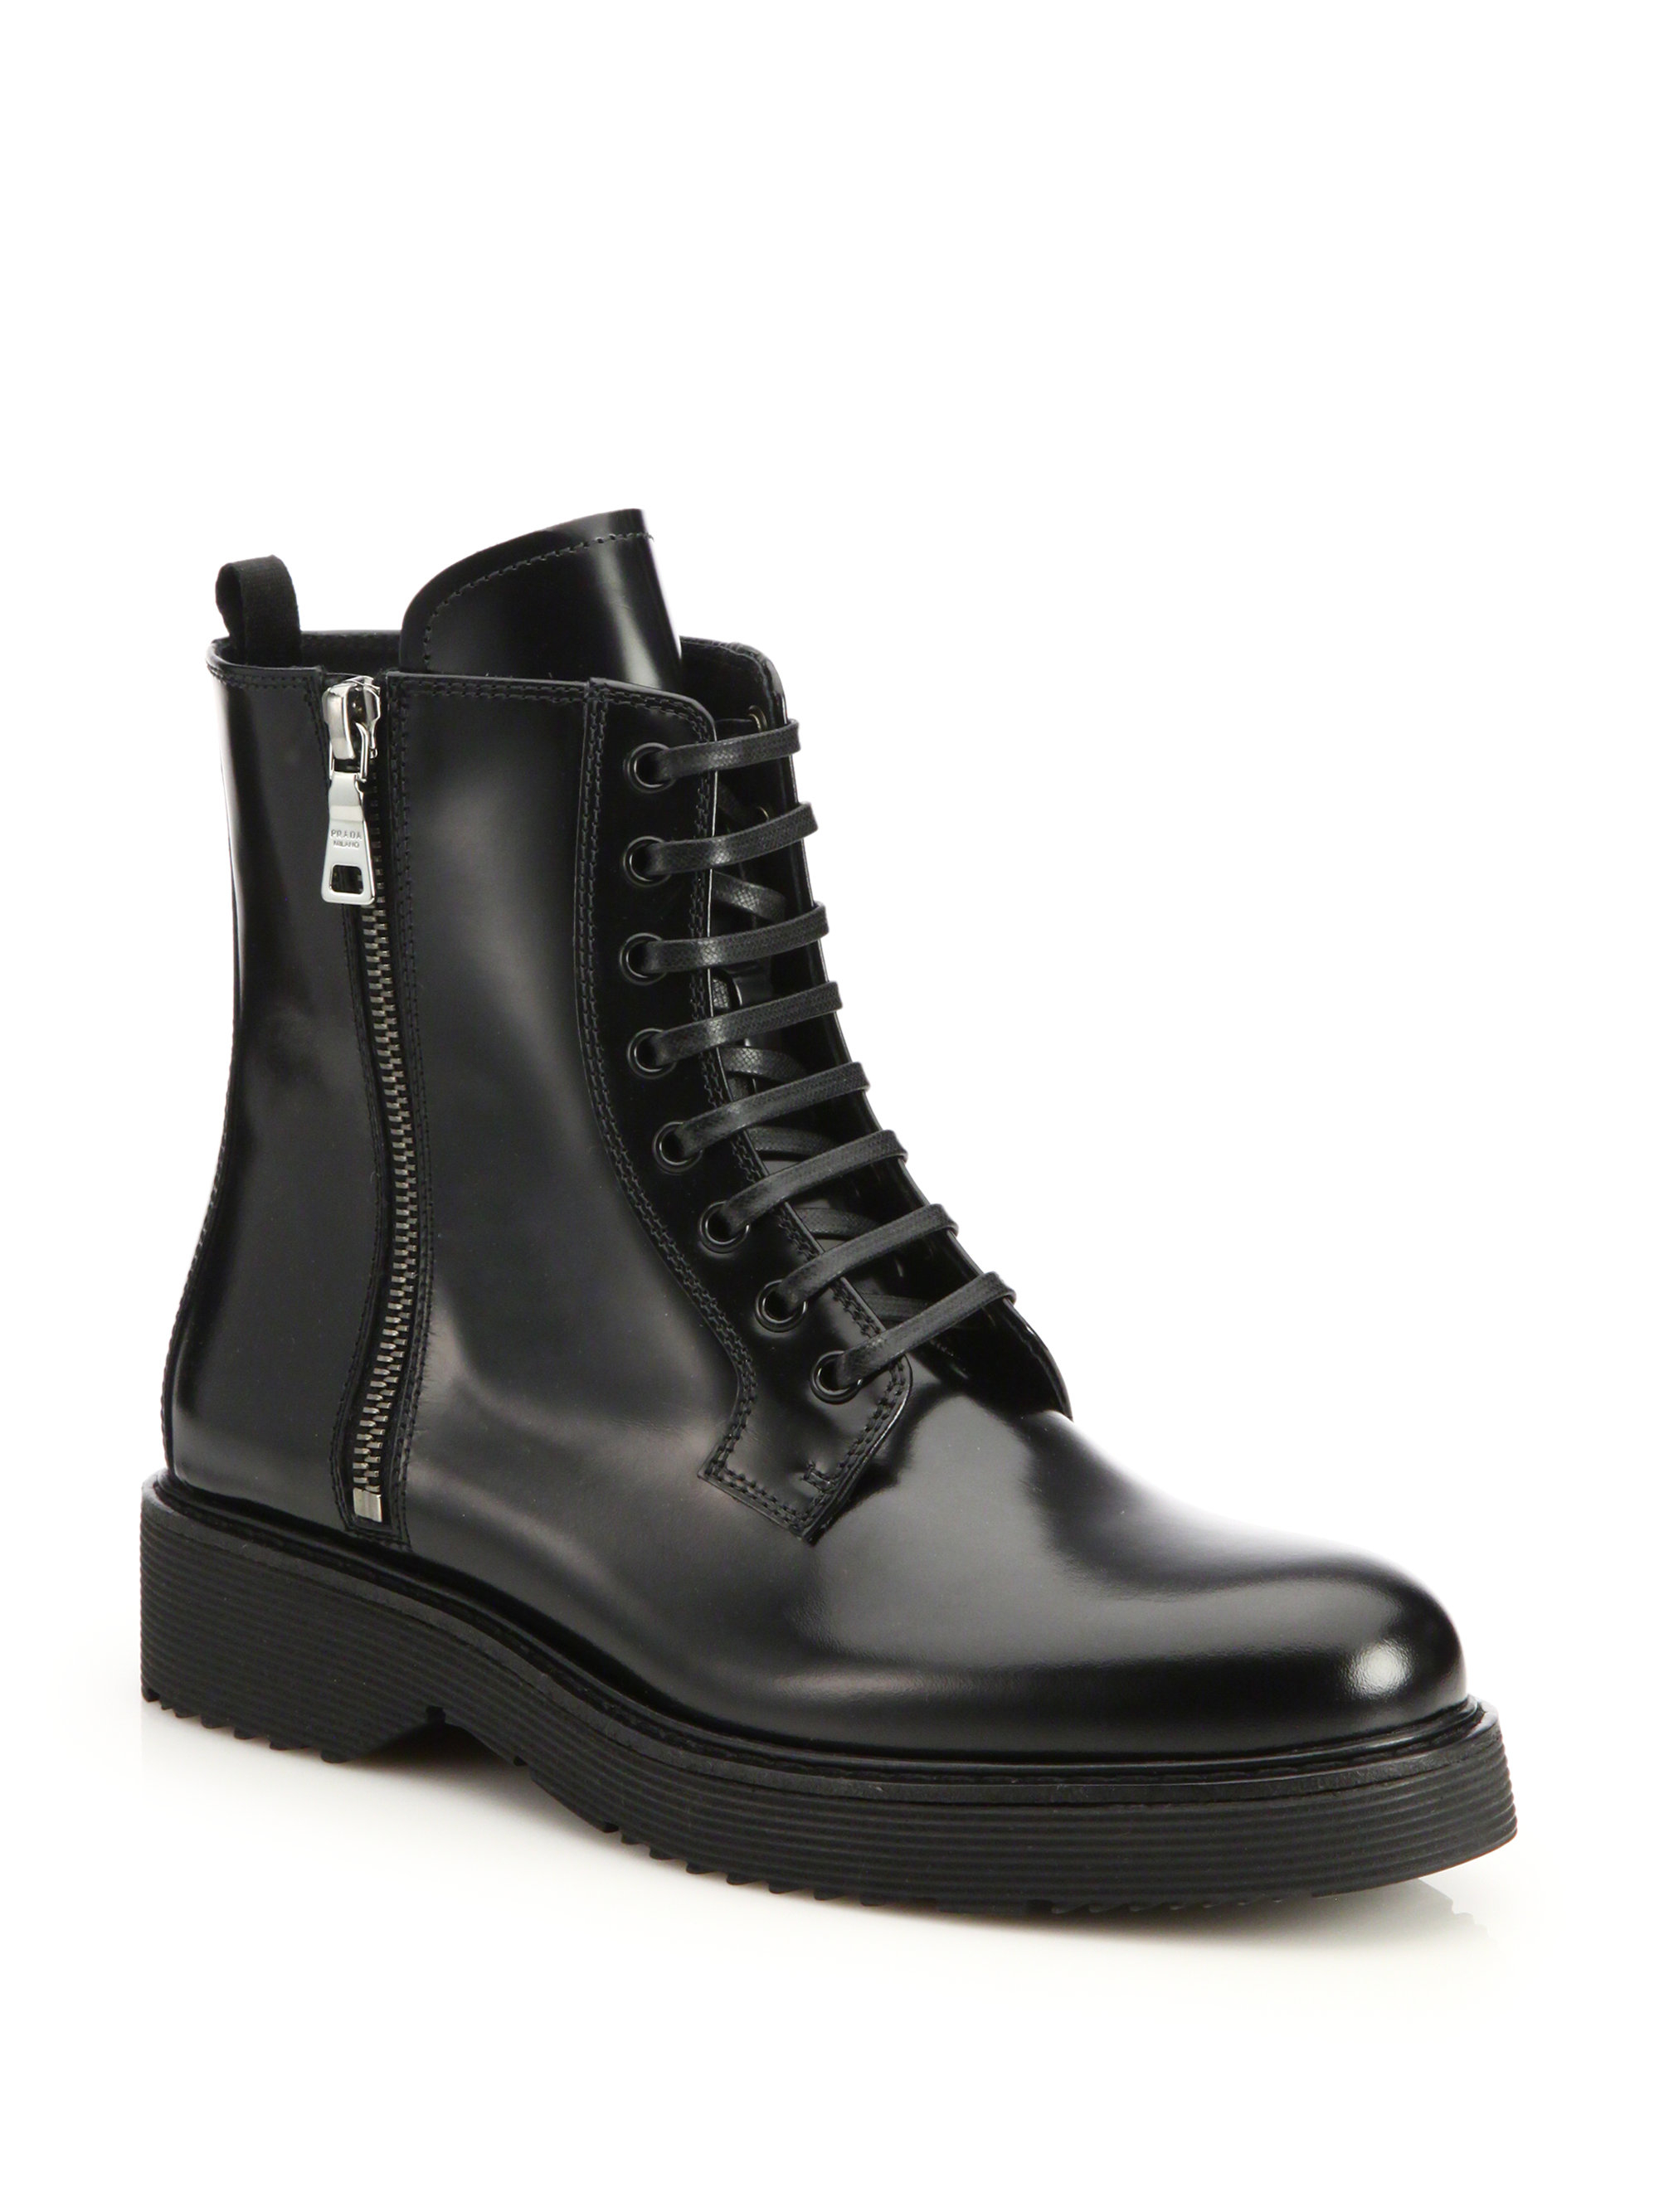 prada boots lace up